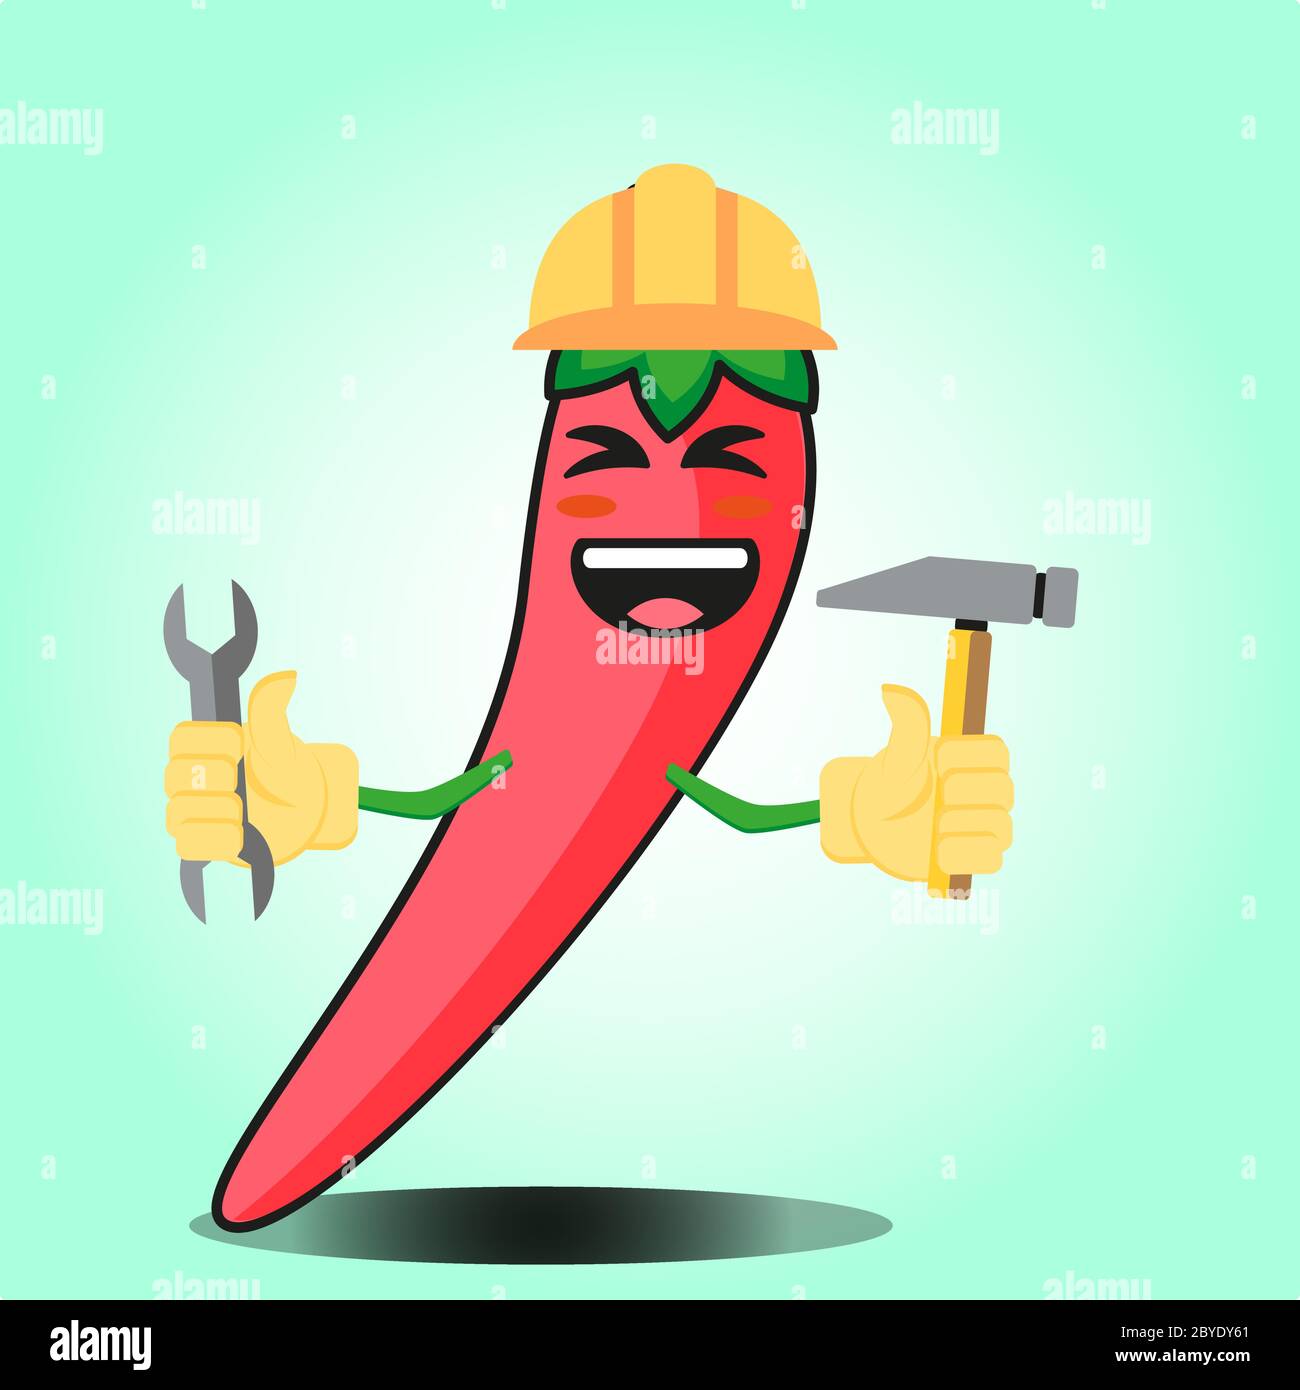 Cute mexican chili engineer cartoon face character with hat, wrench and flower hammer design Stock Vector